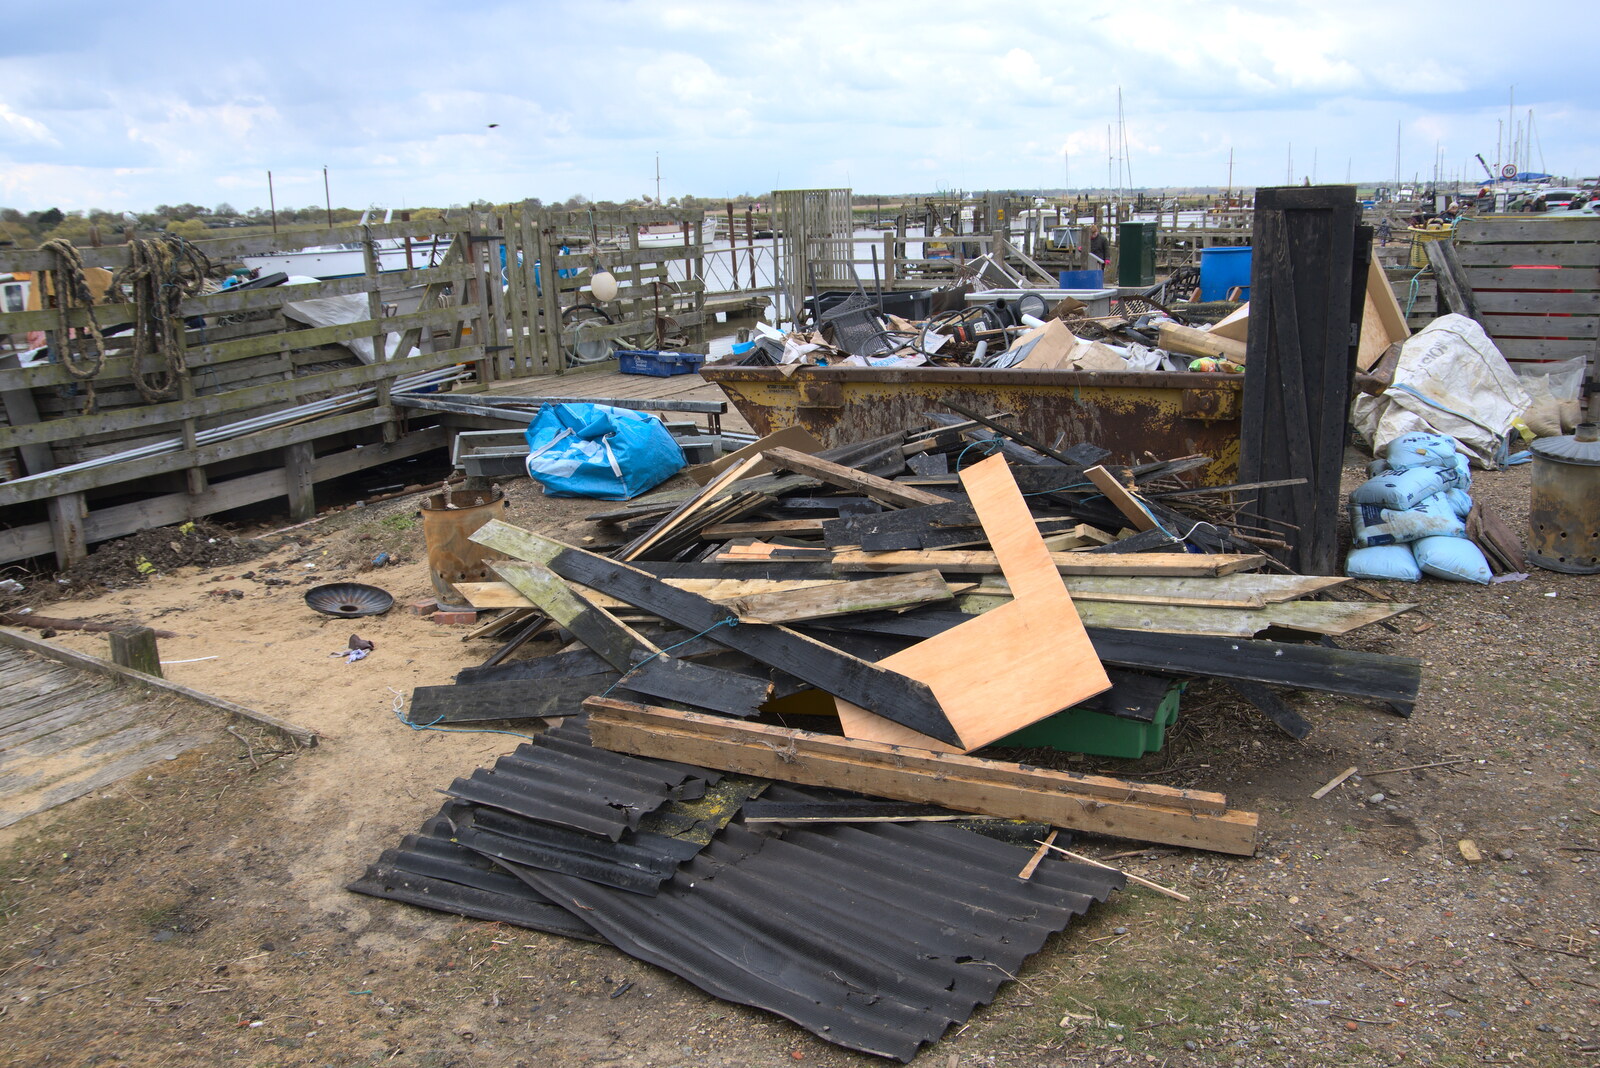 A pile that looks like a building has collapsed from A Chilly Trip to the Beach, Southwold Harbour, Suffolk - 2nd May 2021